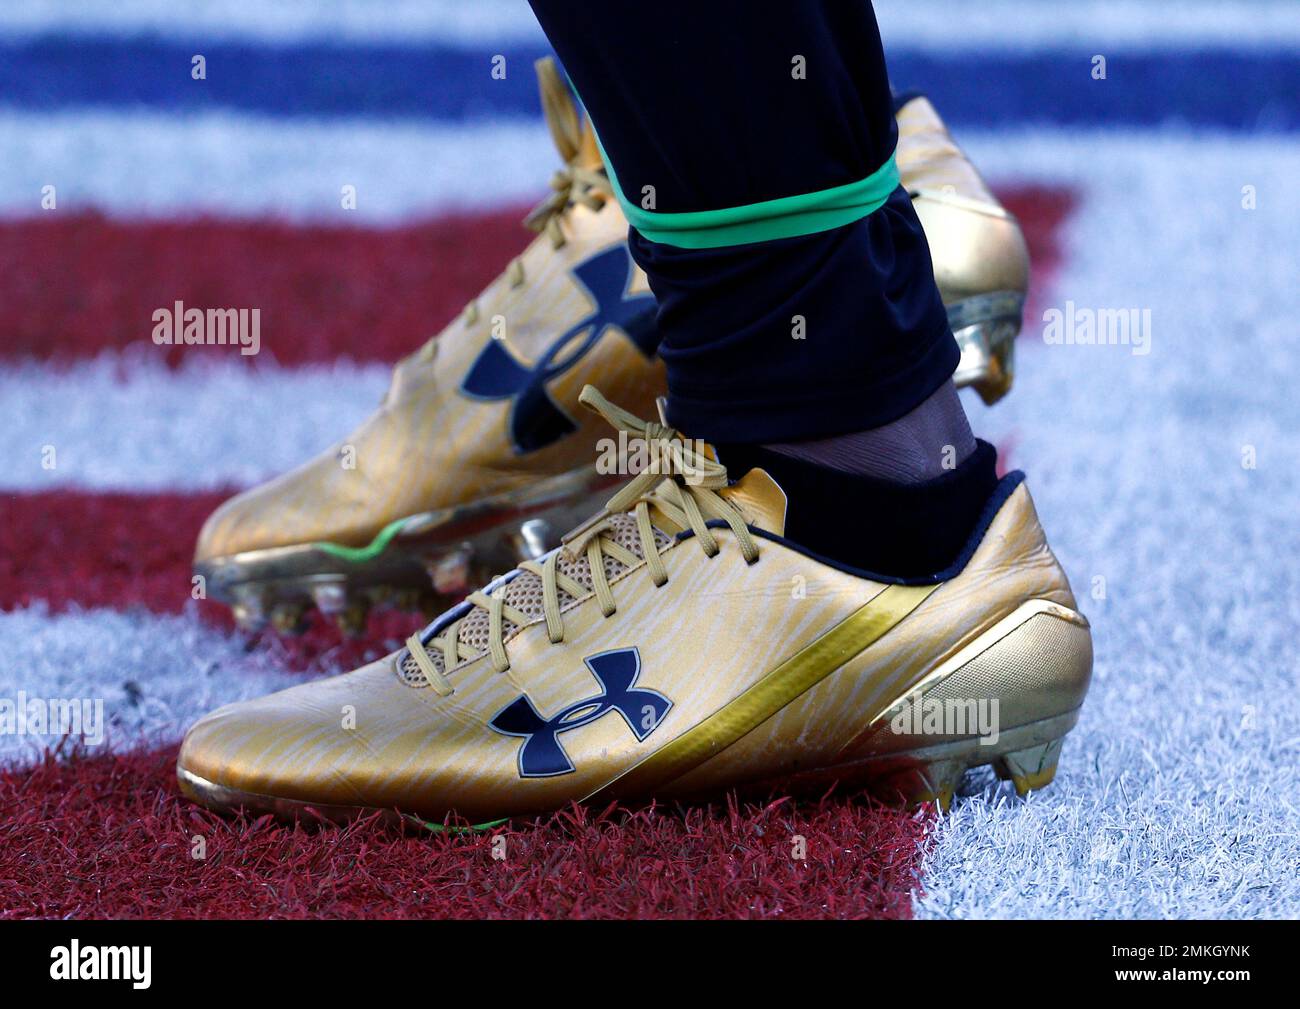 helemaal Op maat Armoedig FILE- In this Dec. 10, 2017, file photo Jacksonville Jaguars running back  T.J. Yeldon warms up wearing Under Armour cleats before an NFL football  game against the Seattle Seahawks in Jacksonville, Fla.